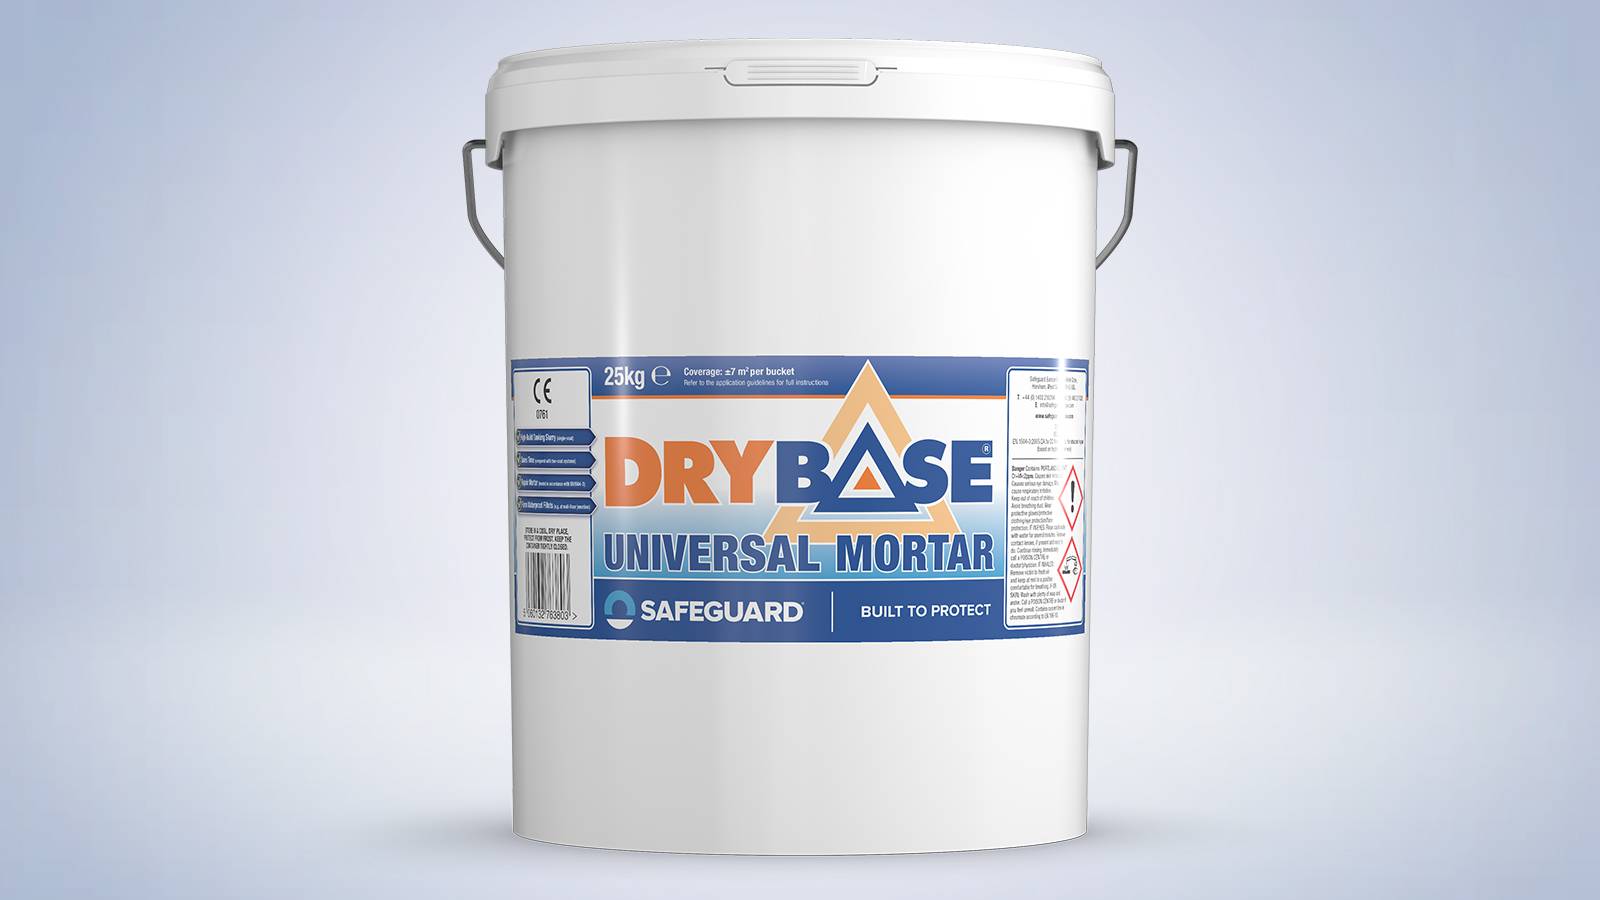 Drybase Universal Mortar - Cementitious, Ready-Mixed Multi-Use Waterproofing and Repair Mortar for Concrete, Masonry and Natural Stonework 